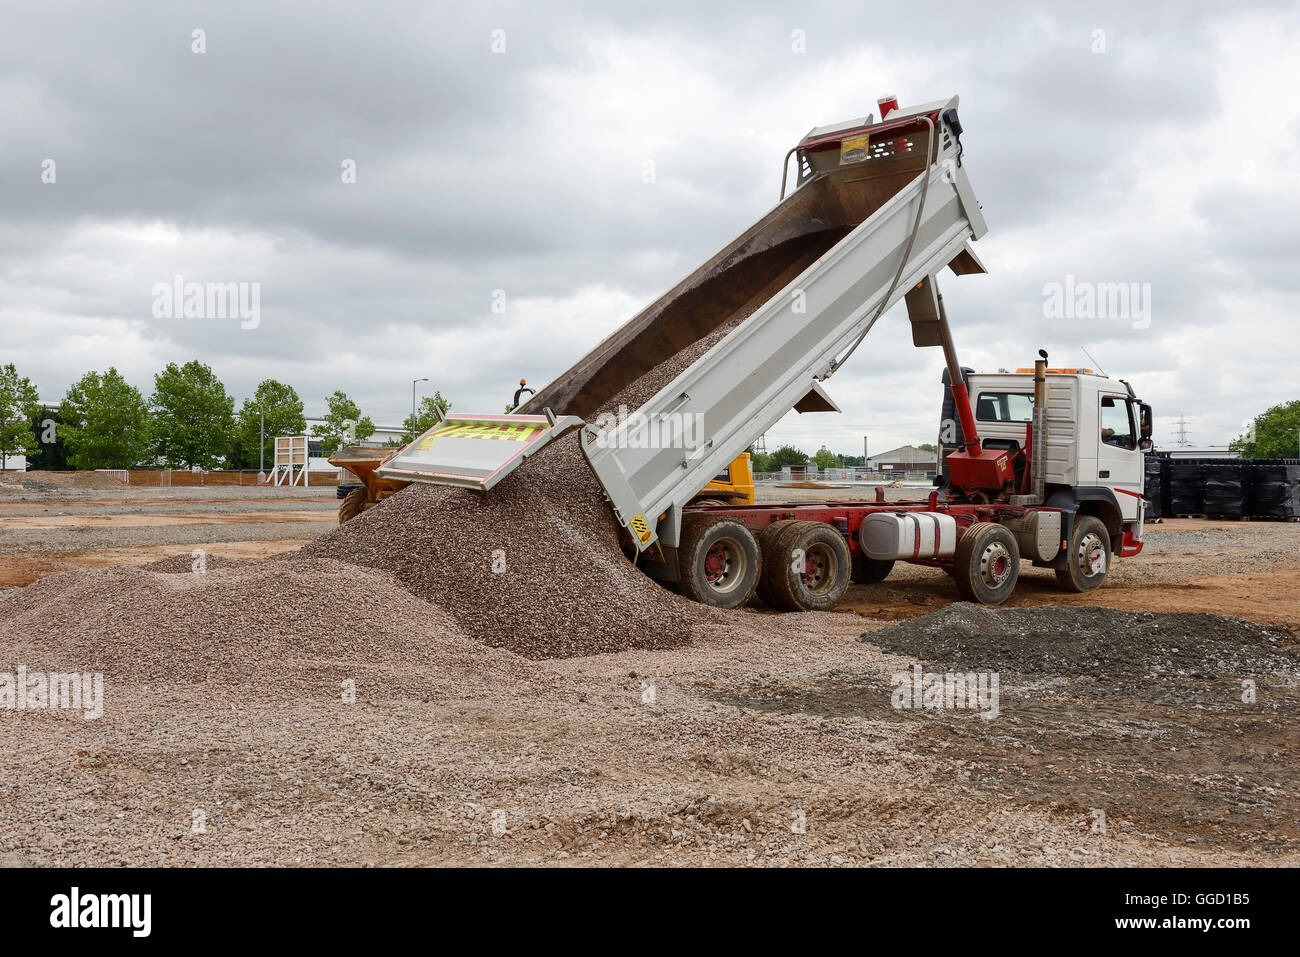 Tipper truck delivering stones at a UK construction site Stock Photo